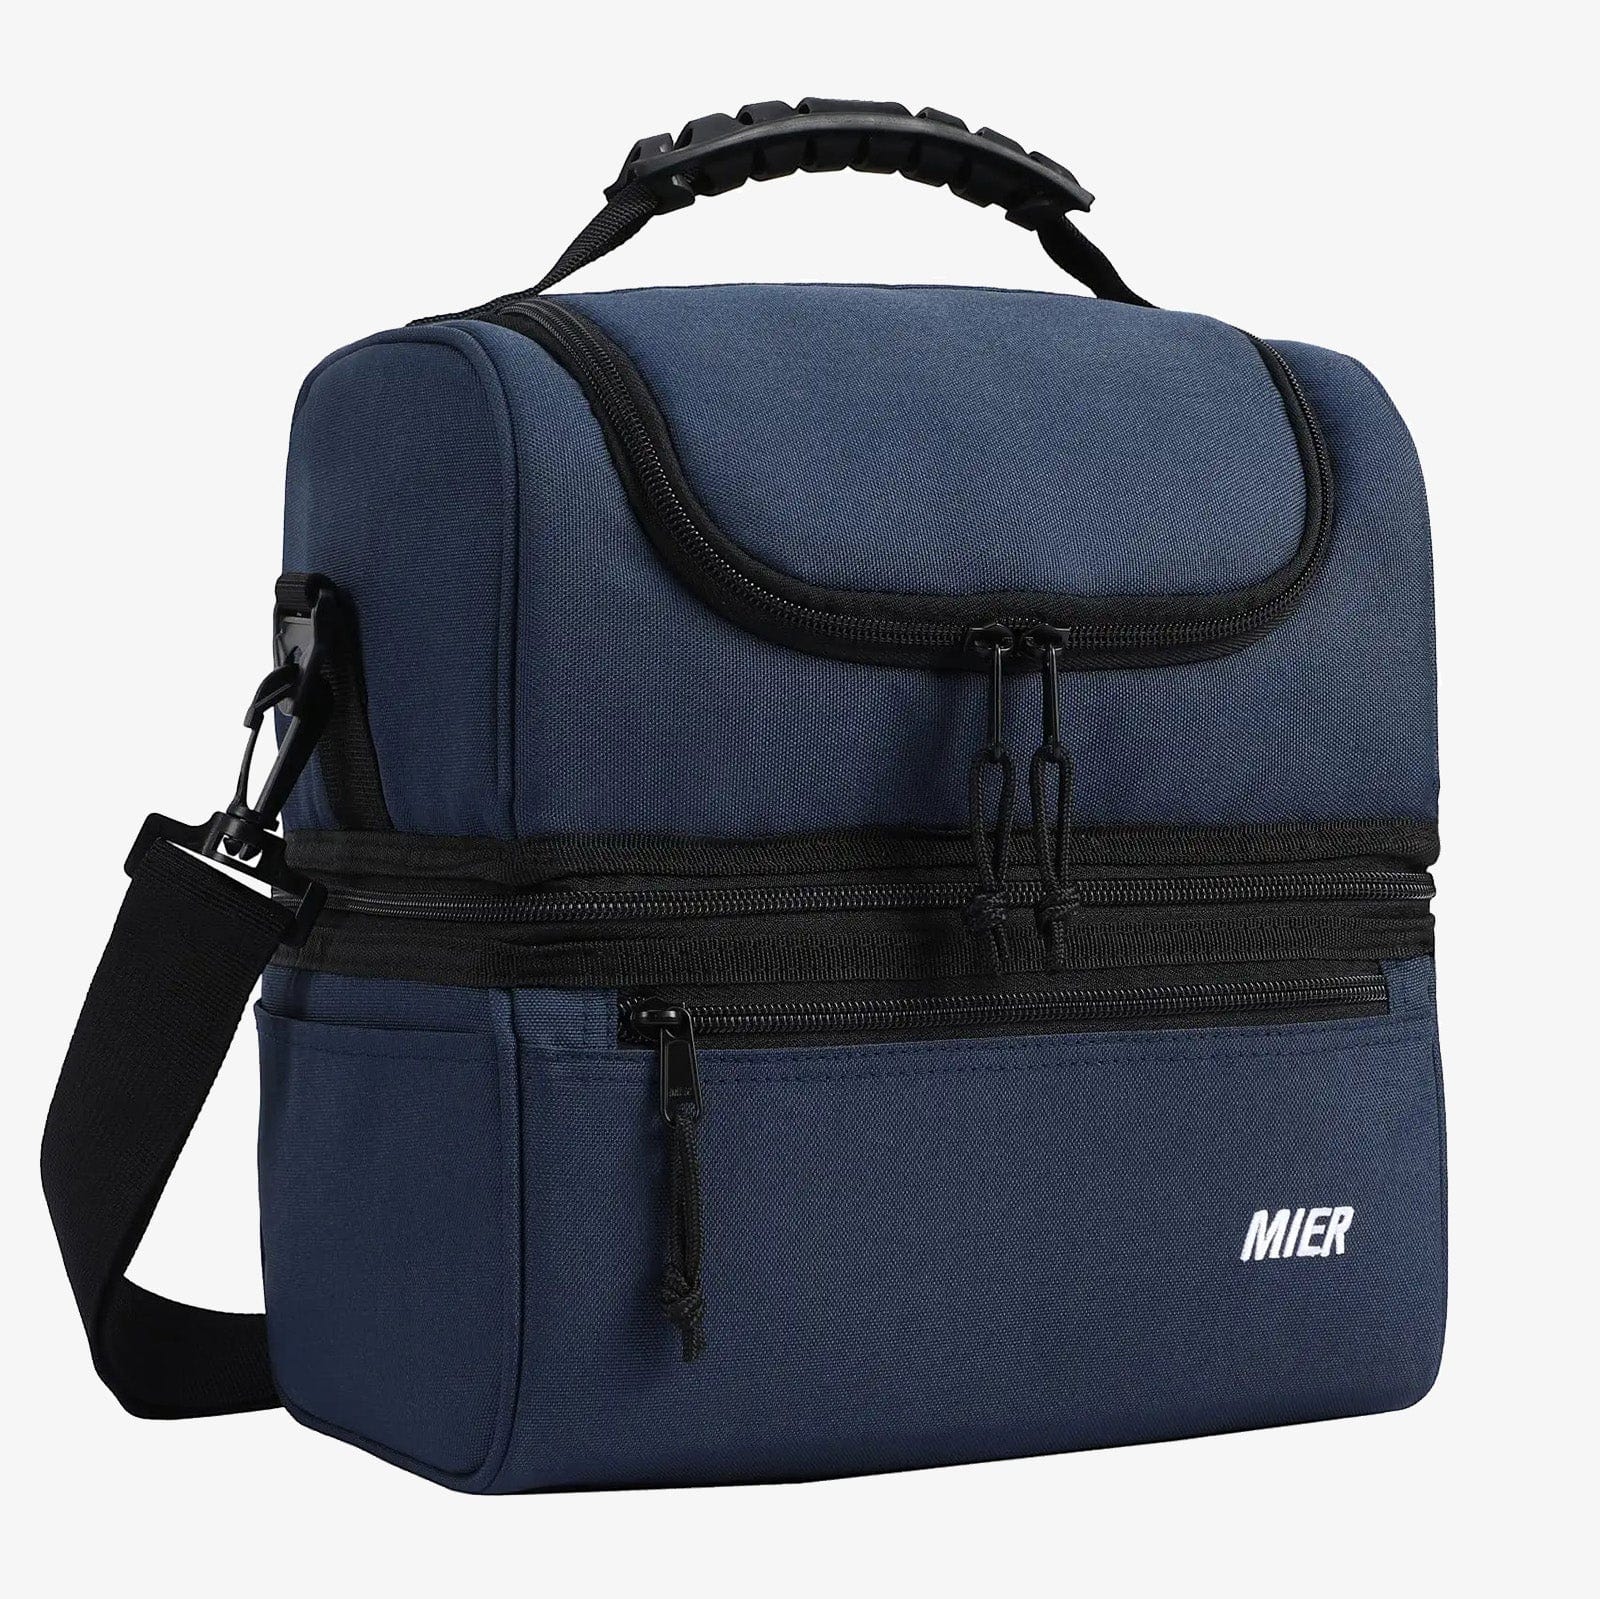 MIER Adult Lunch Box Insulated Lunch Bag Large Cooler Tote, Navy / Large